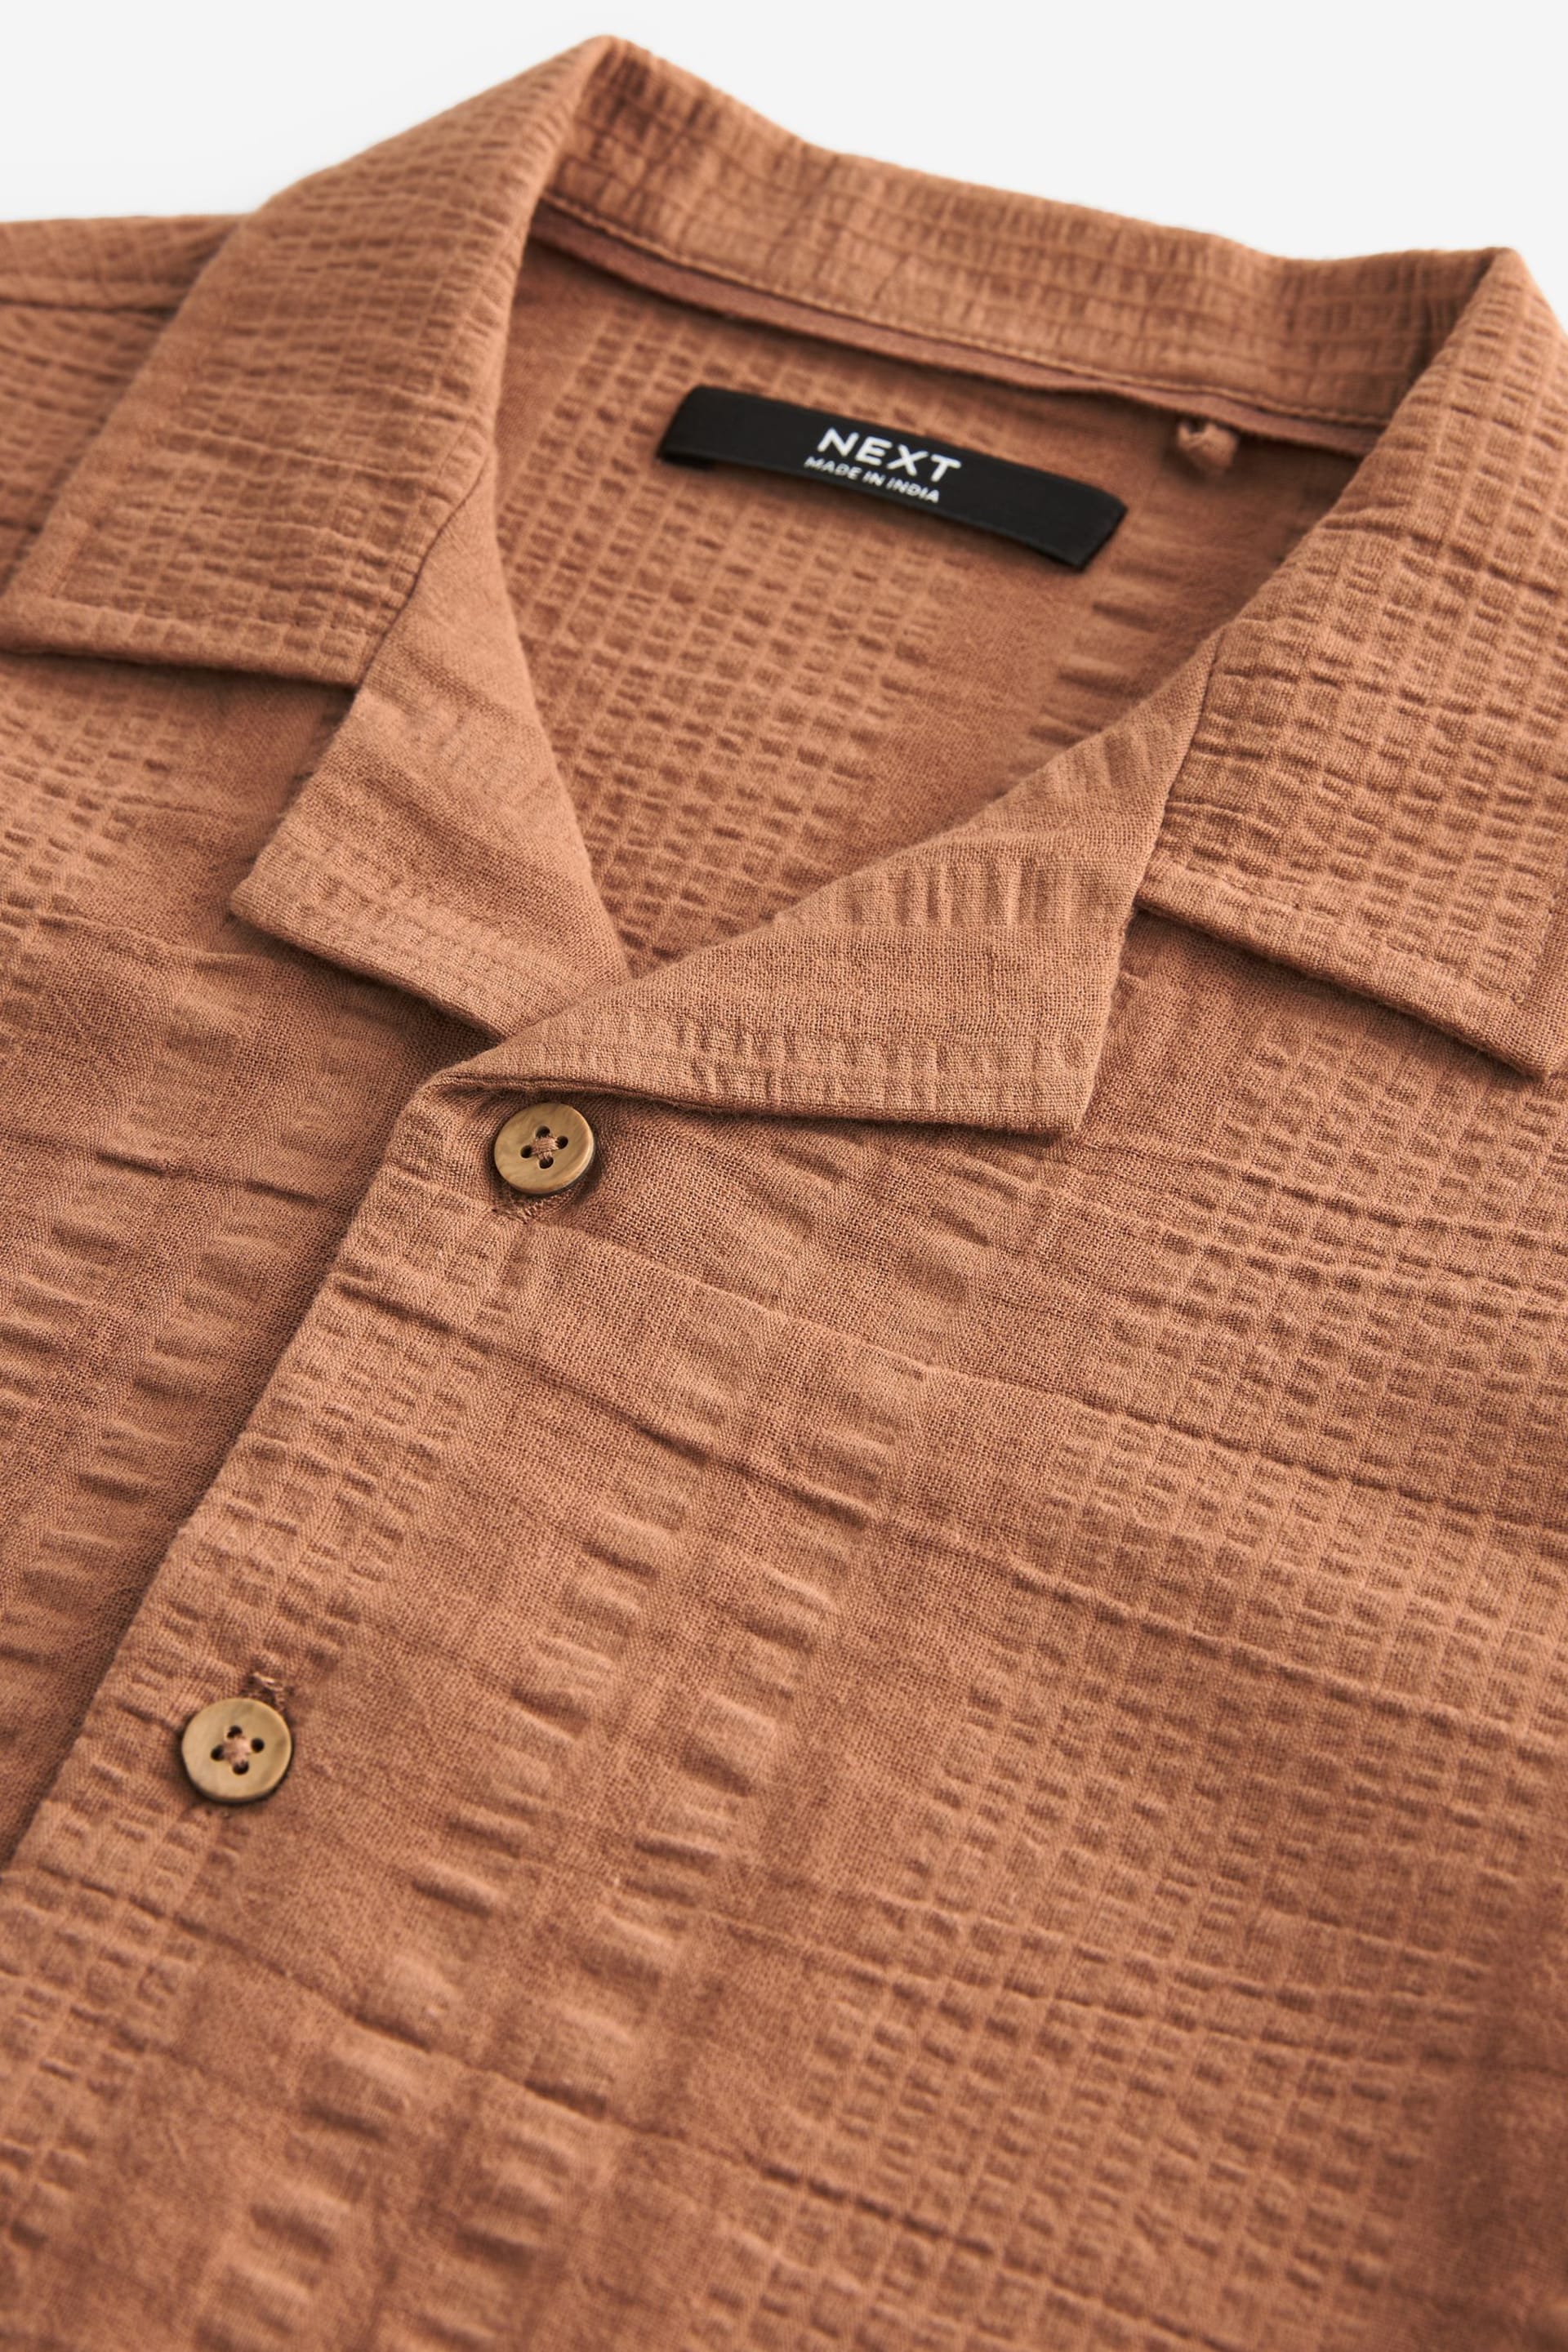 Rust Brown Short Sleeves Textured Shirt (3-16yrs) - Image 1 of 3